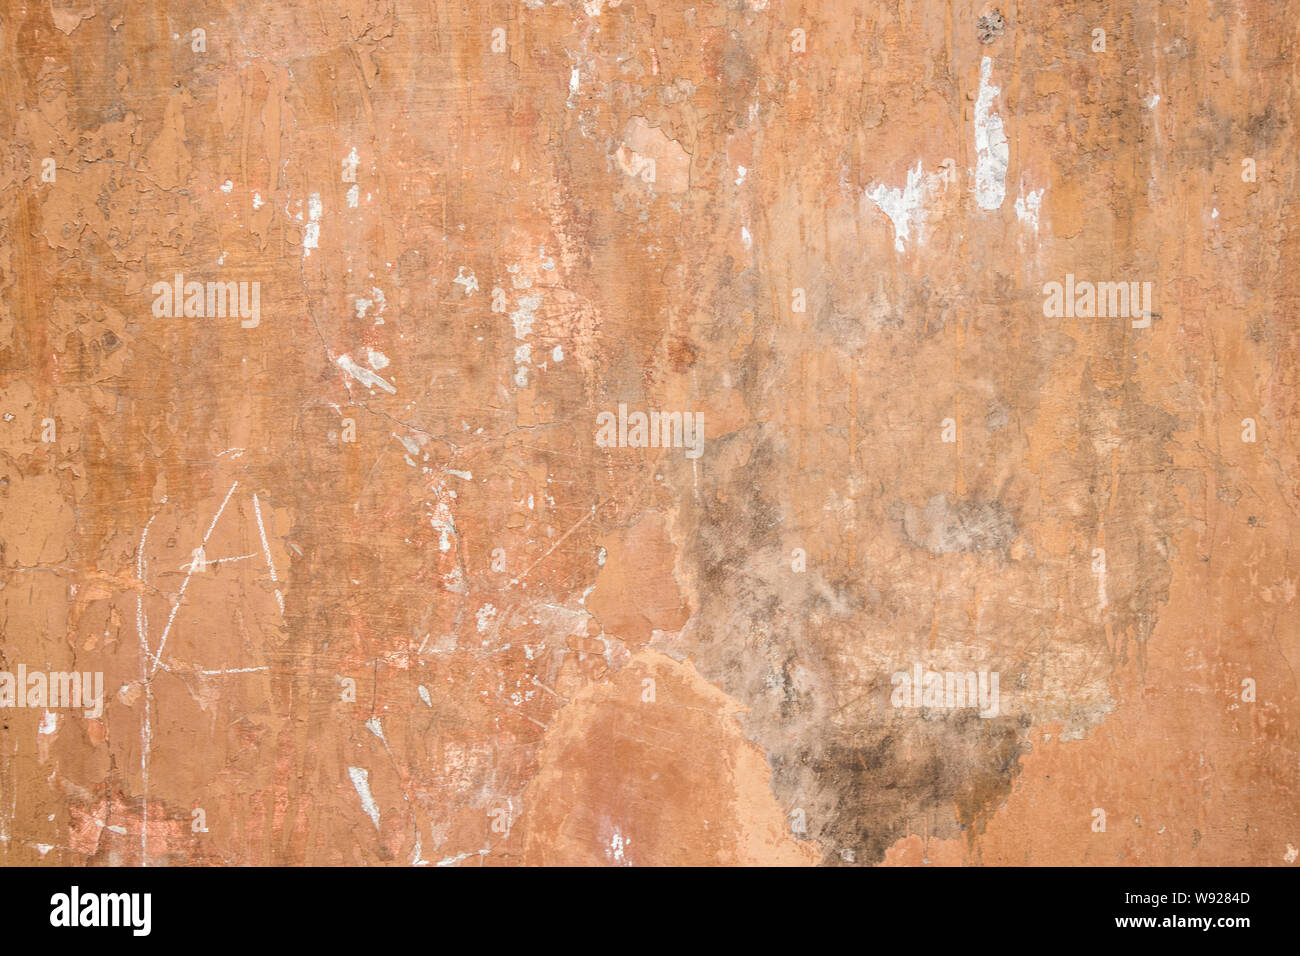 An ancient historian wall as background pattern Stock Photo